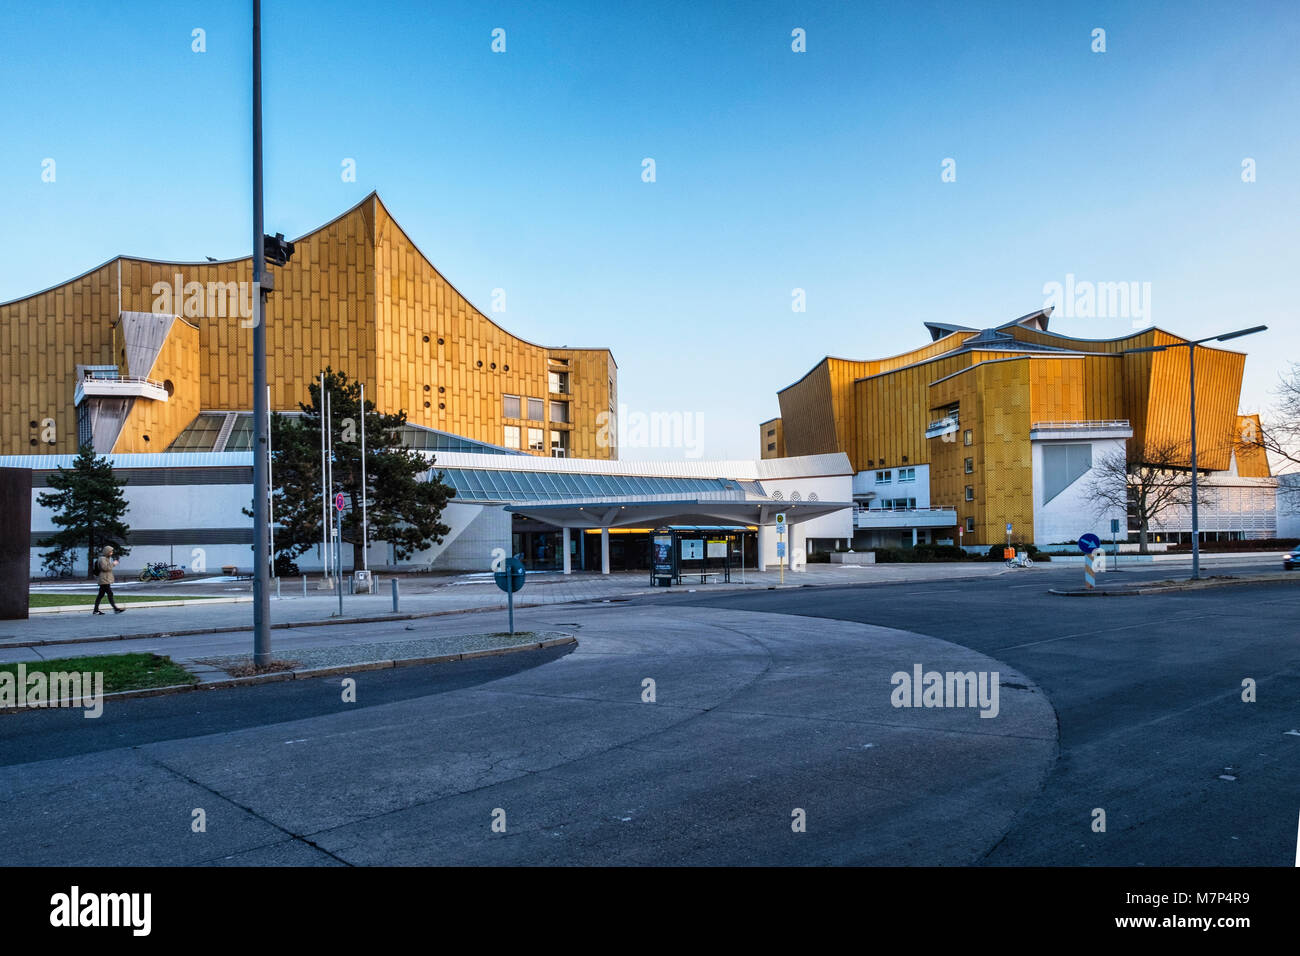 Berliner Philharmonie,Berlin Philharmonic Concert Hall designed by Hans Scharoun. Classical concert venue with stylish modern architecture Stock Photo